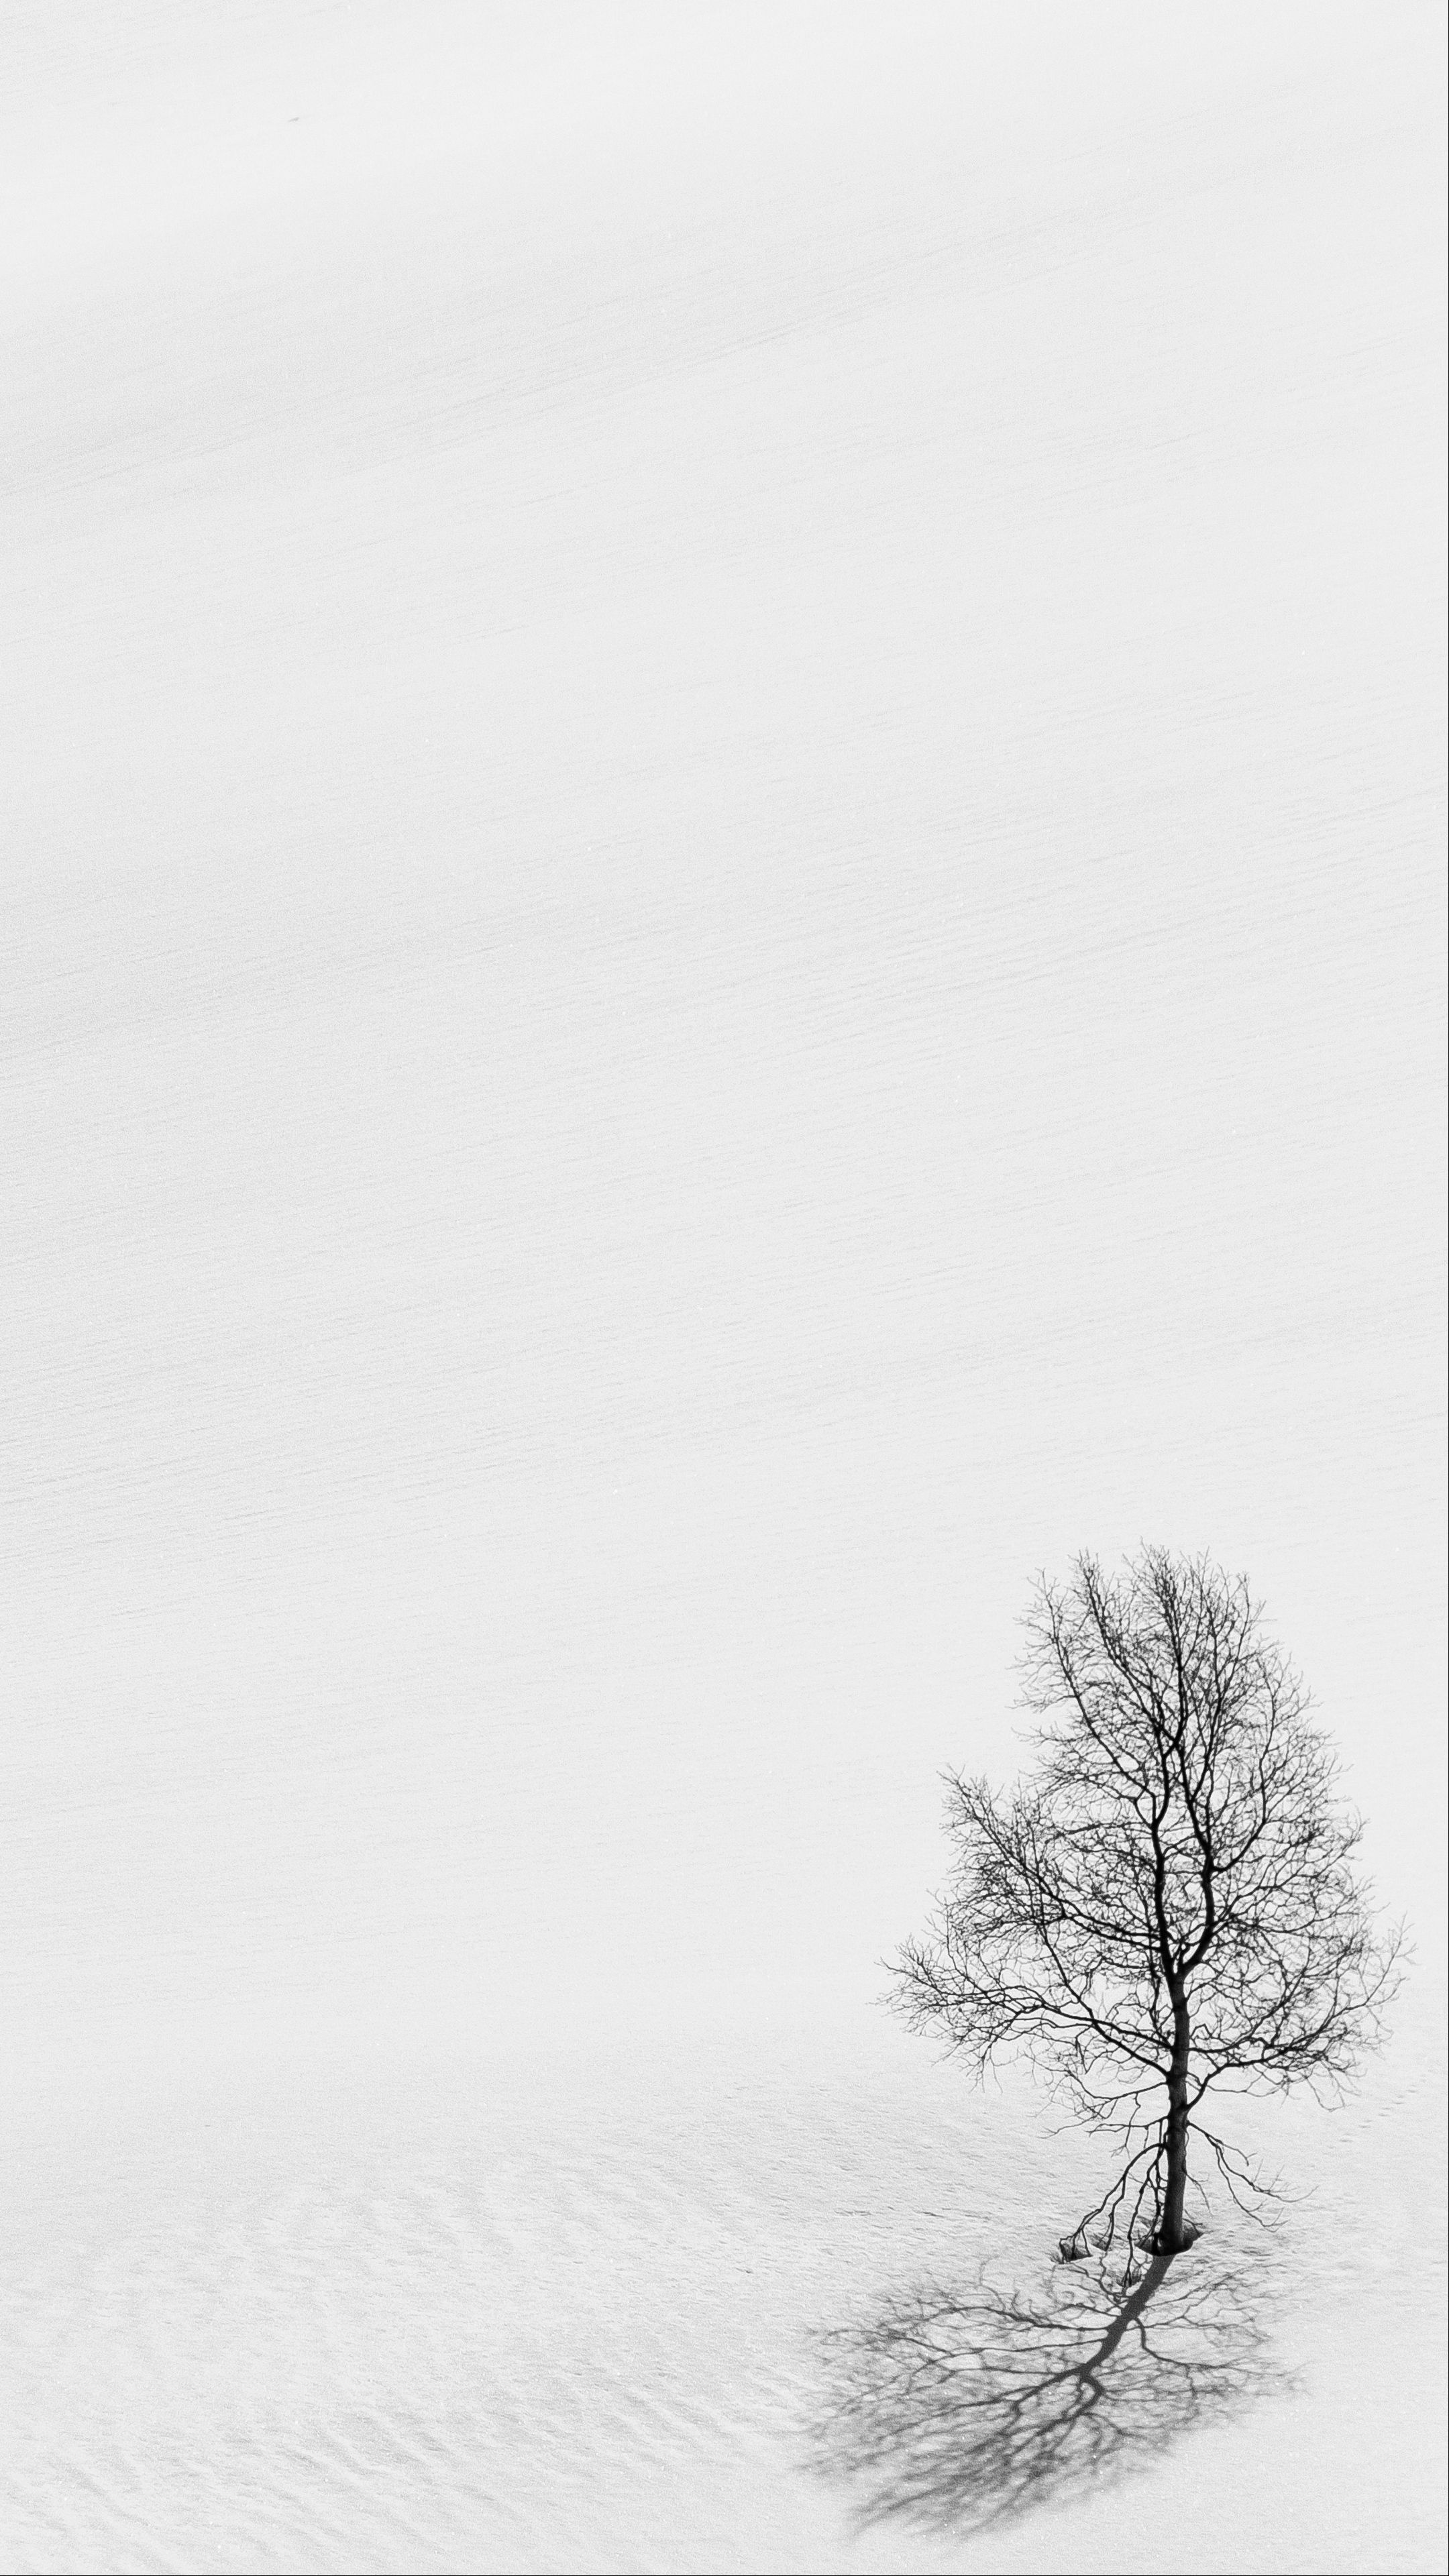 Nature #tree #snow #minimalism #wallpaper HD 4k background for android :). iPhone wallpaper minimalist, Wallpaper minimalist, Minimal wallpaper